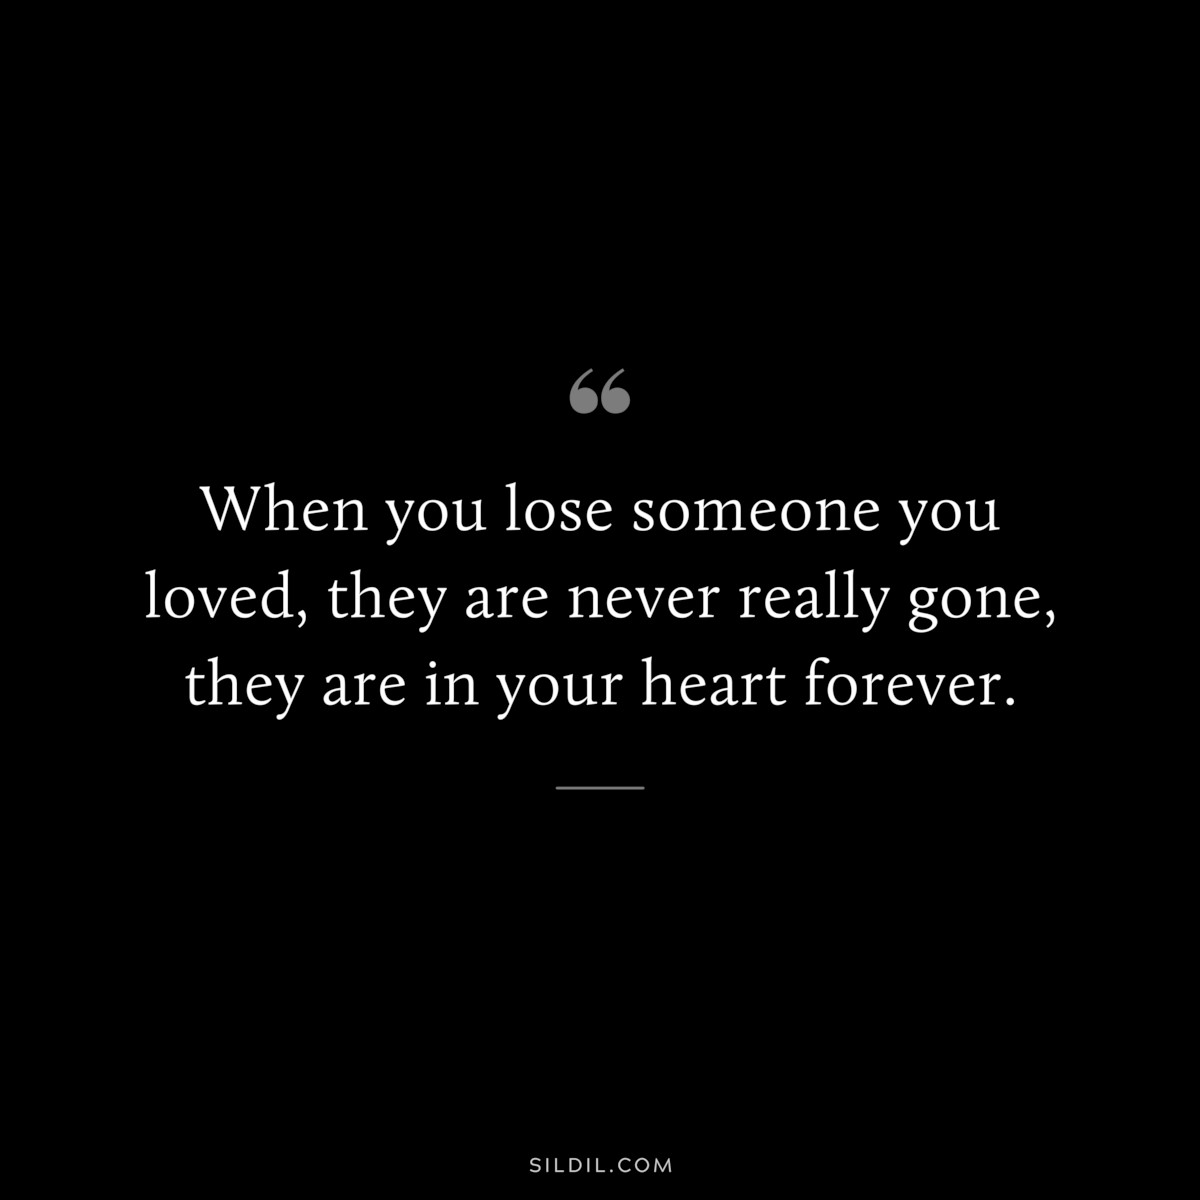 When you lose someone you loved, they are never really gone, they are in your heart forever.